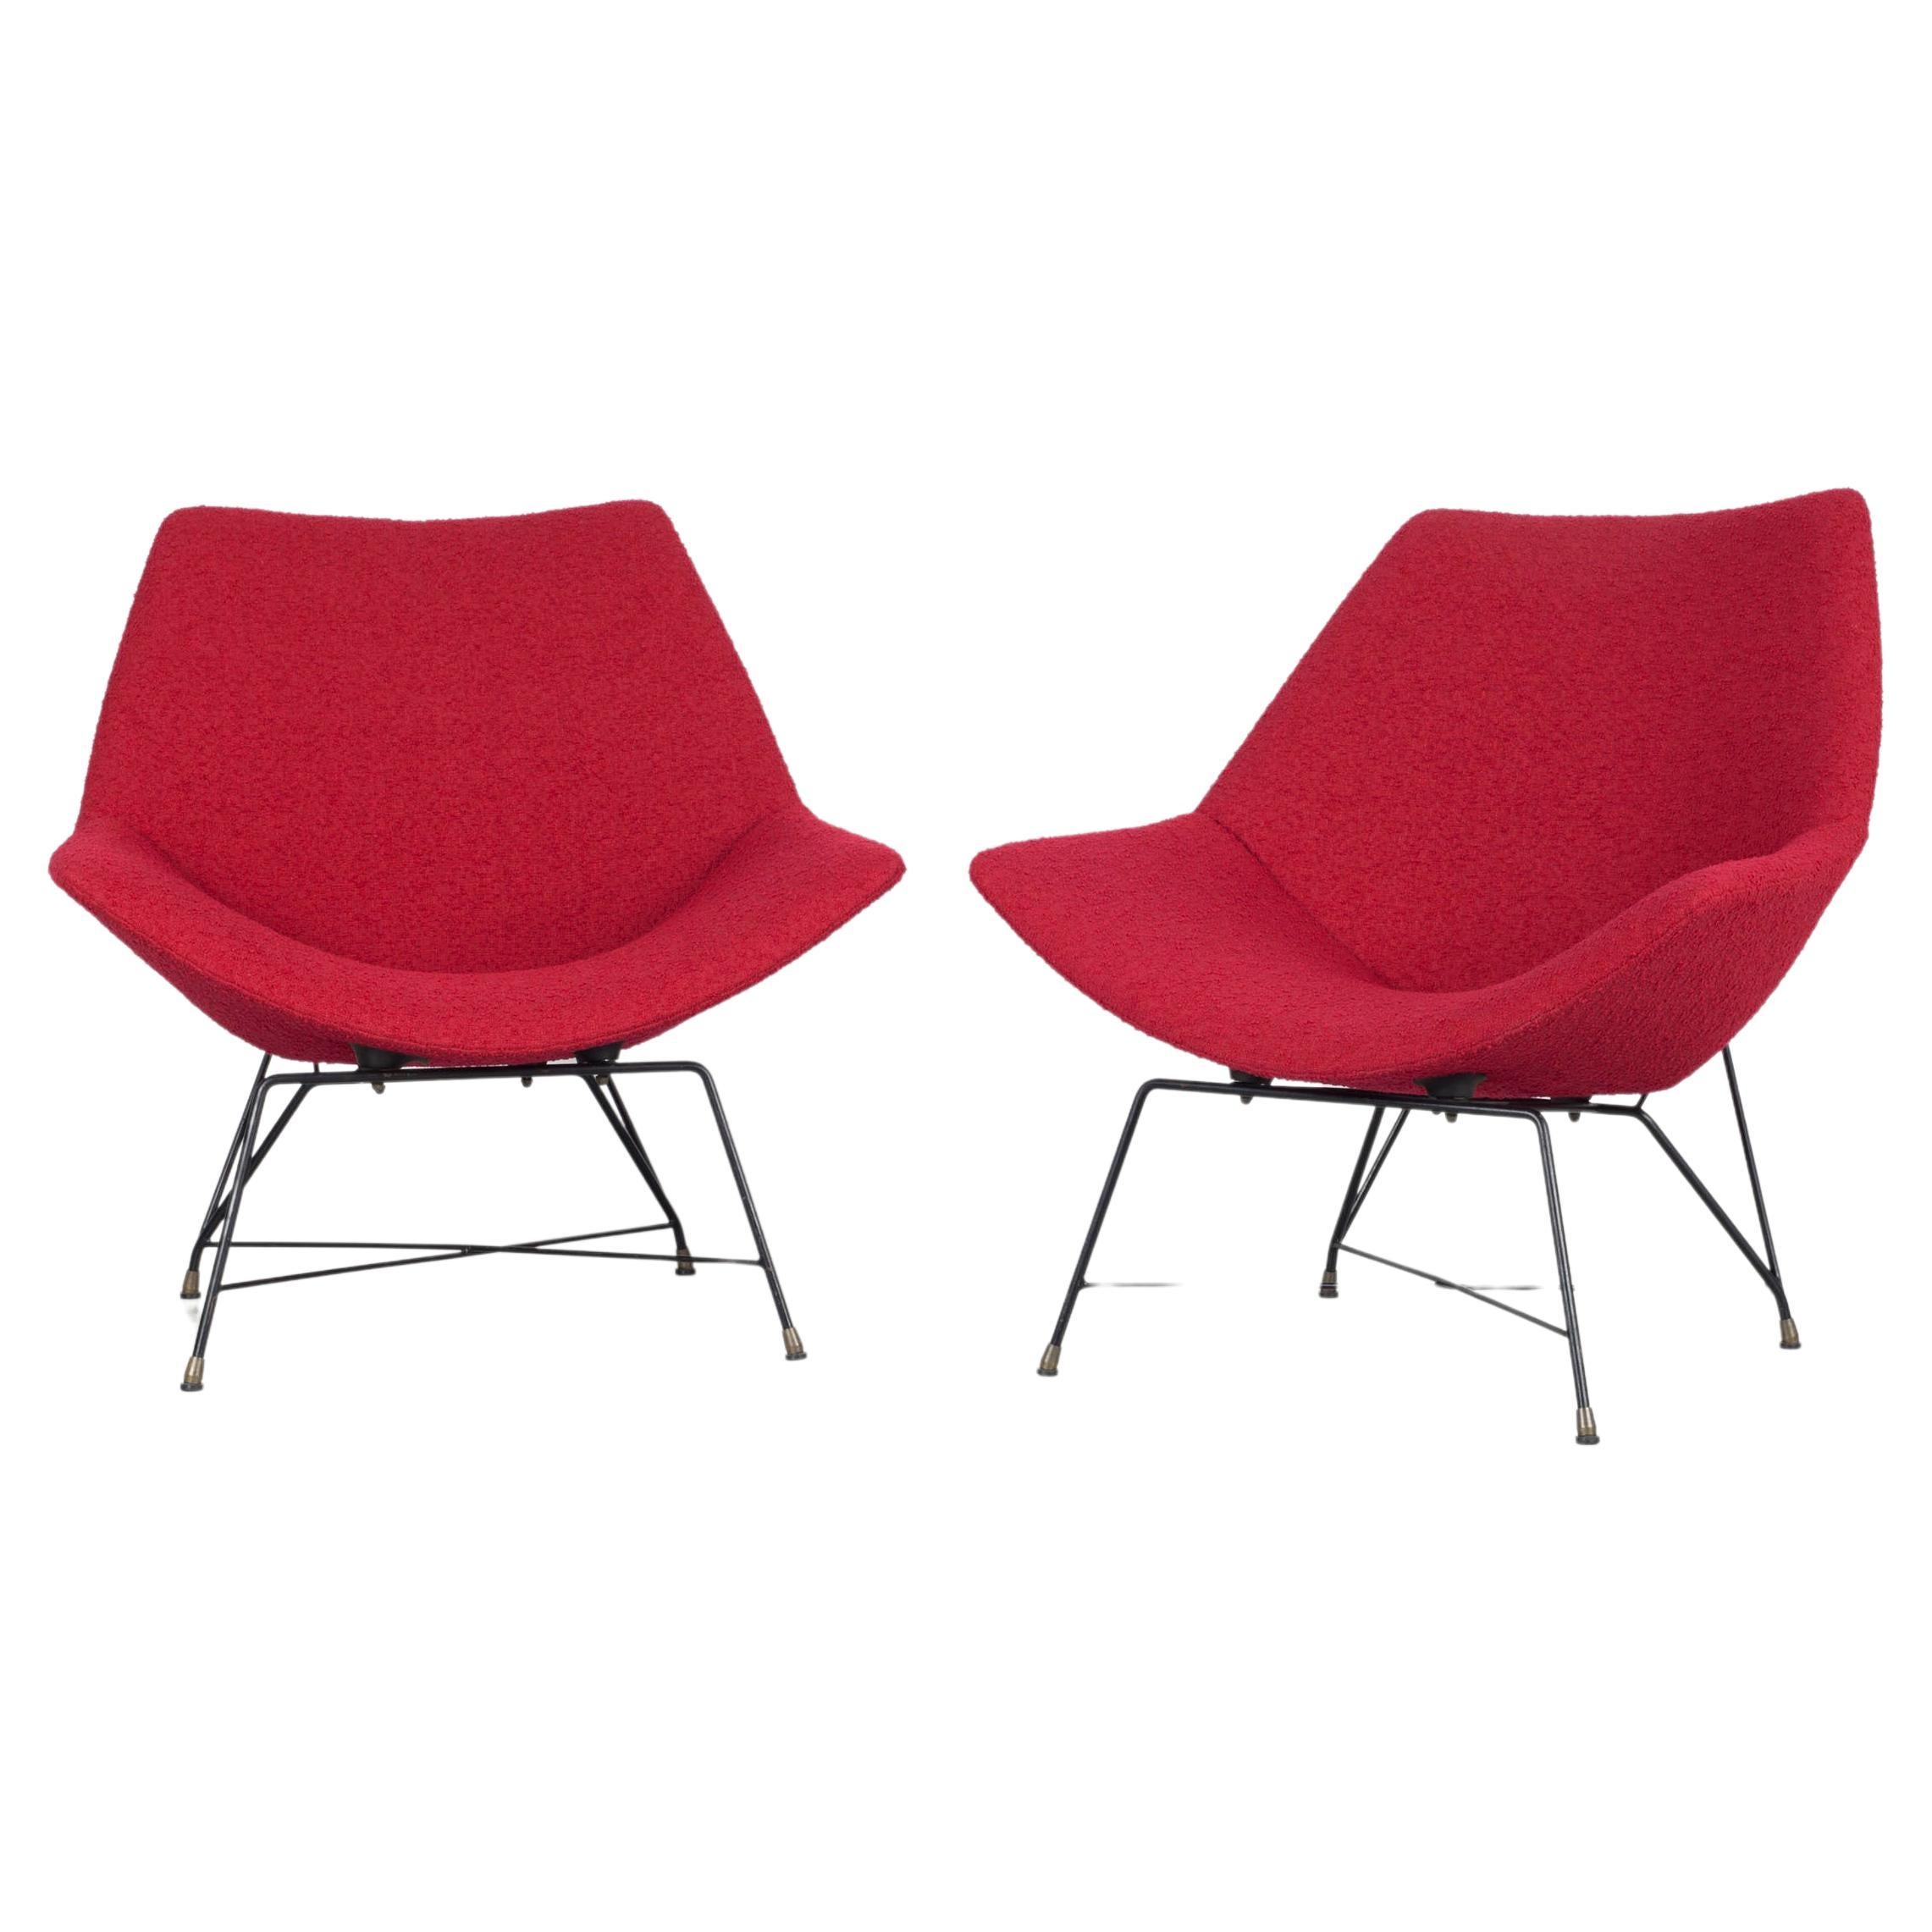 Pair of Augusto Bozzi Chairs Manufactured by Saporiti in Italy in 1950s